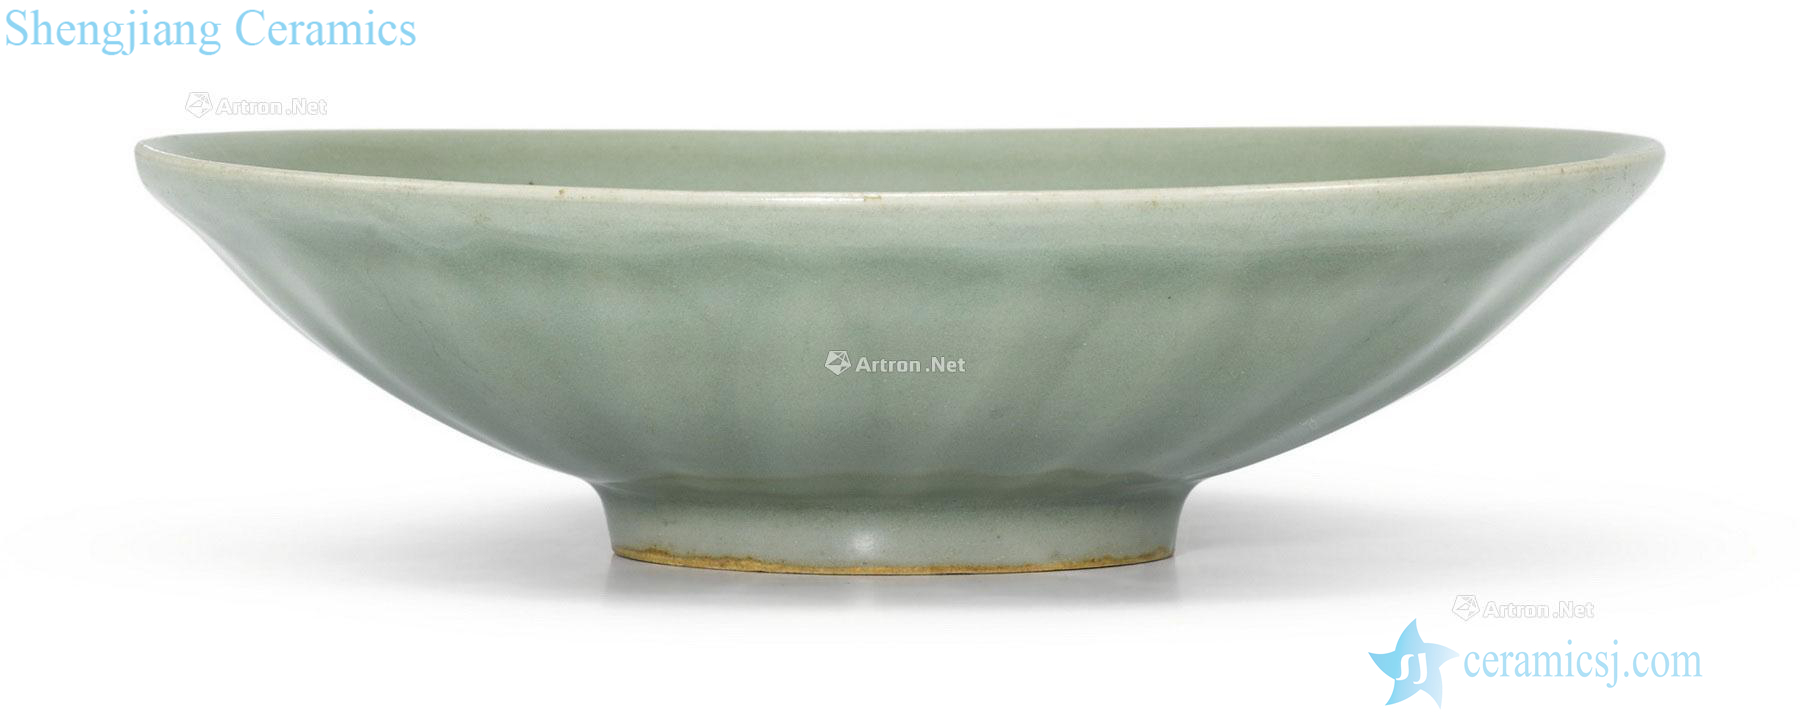 The southern song dynasty Longquan green glaze lotus valve tray